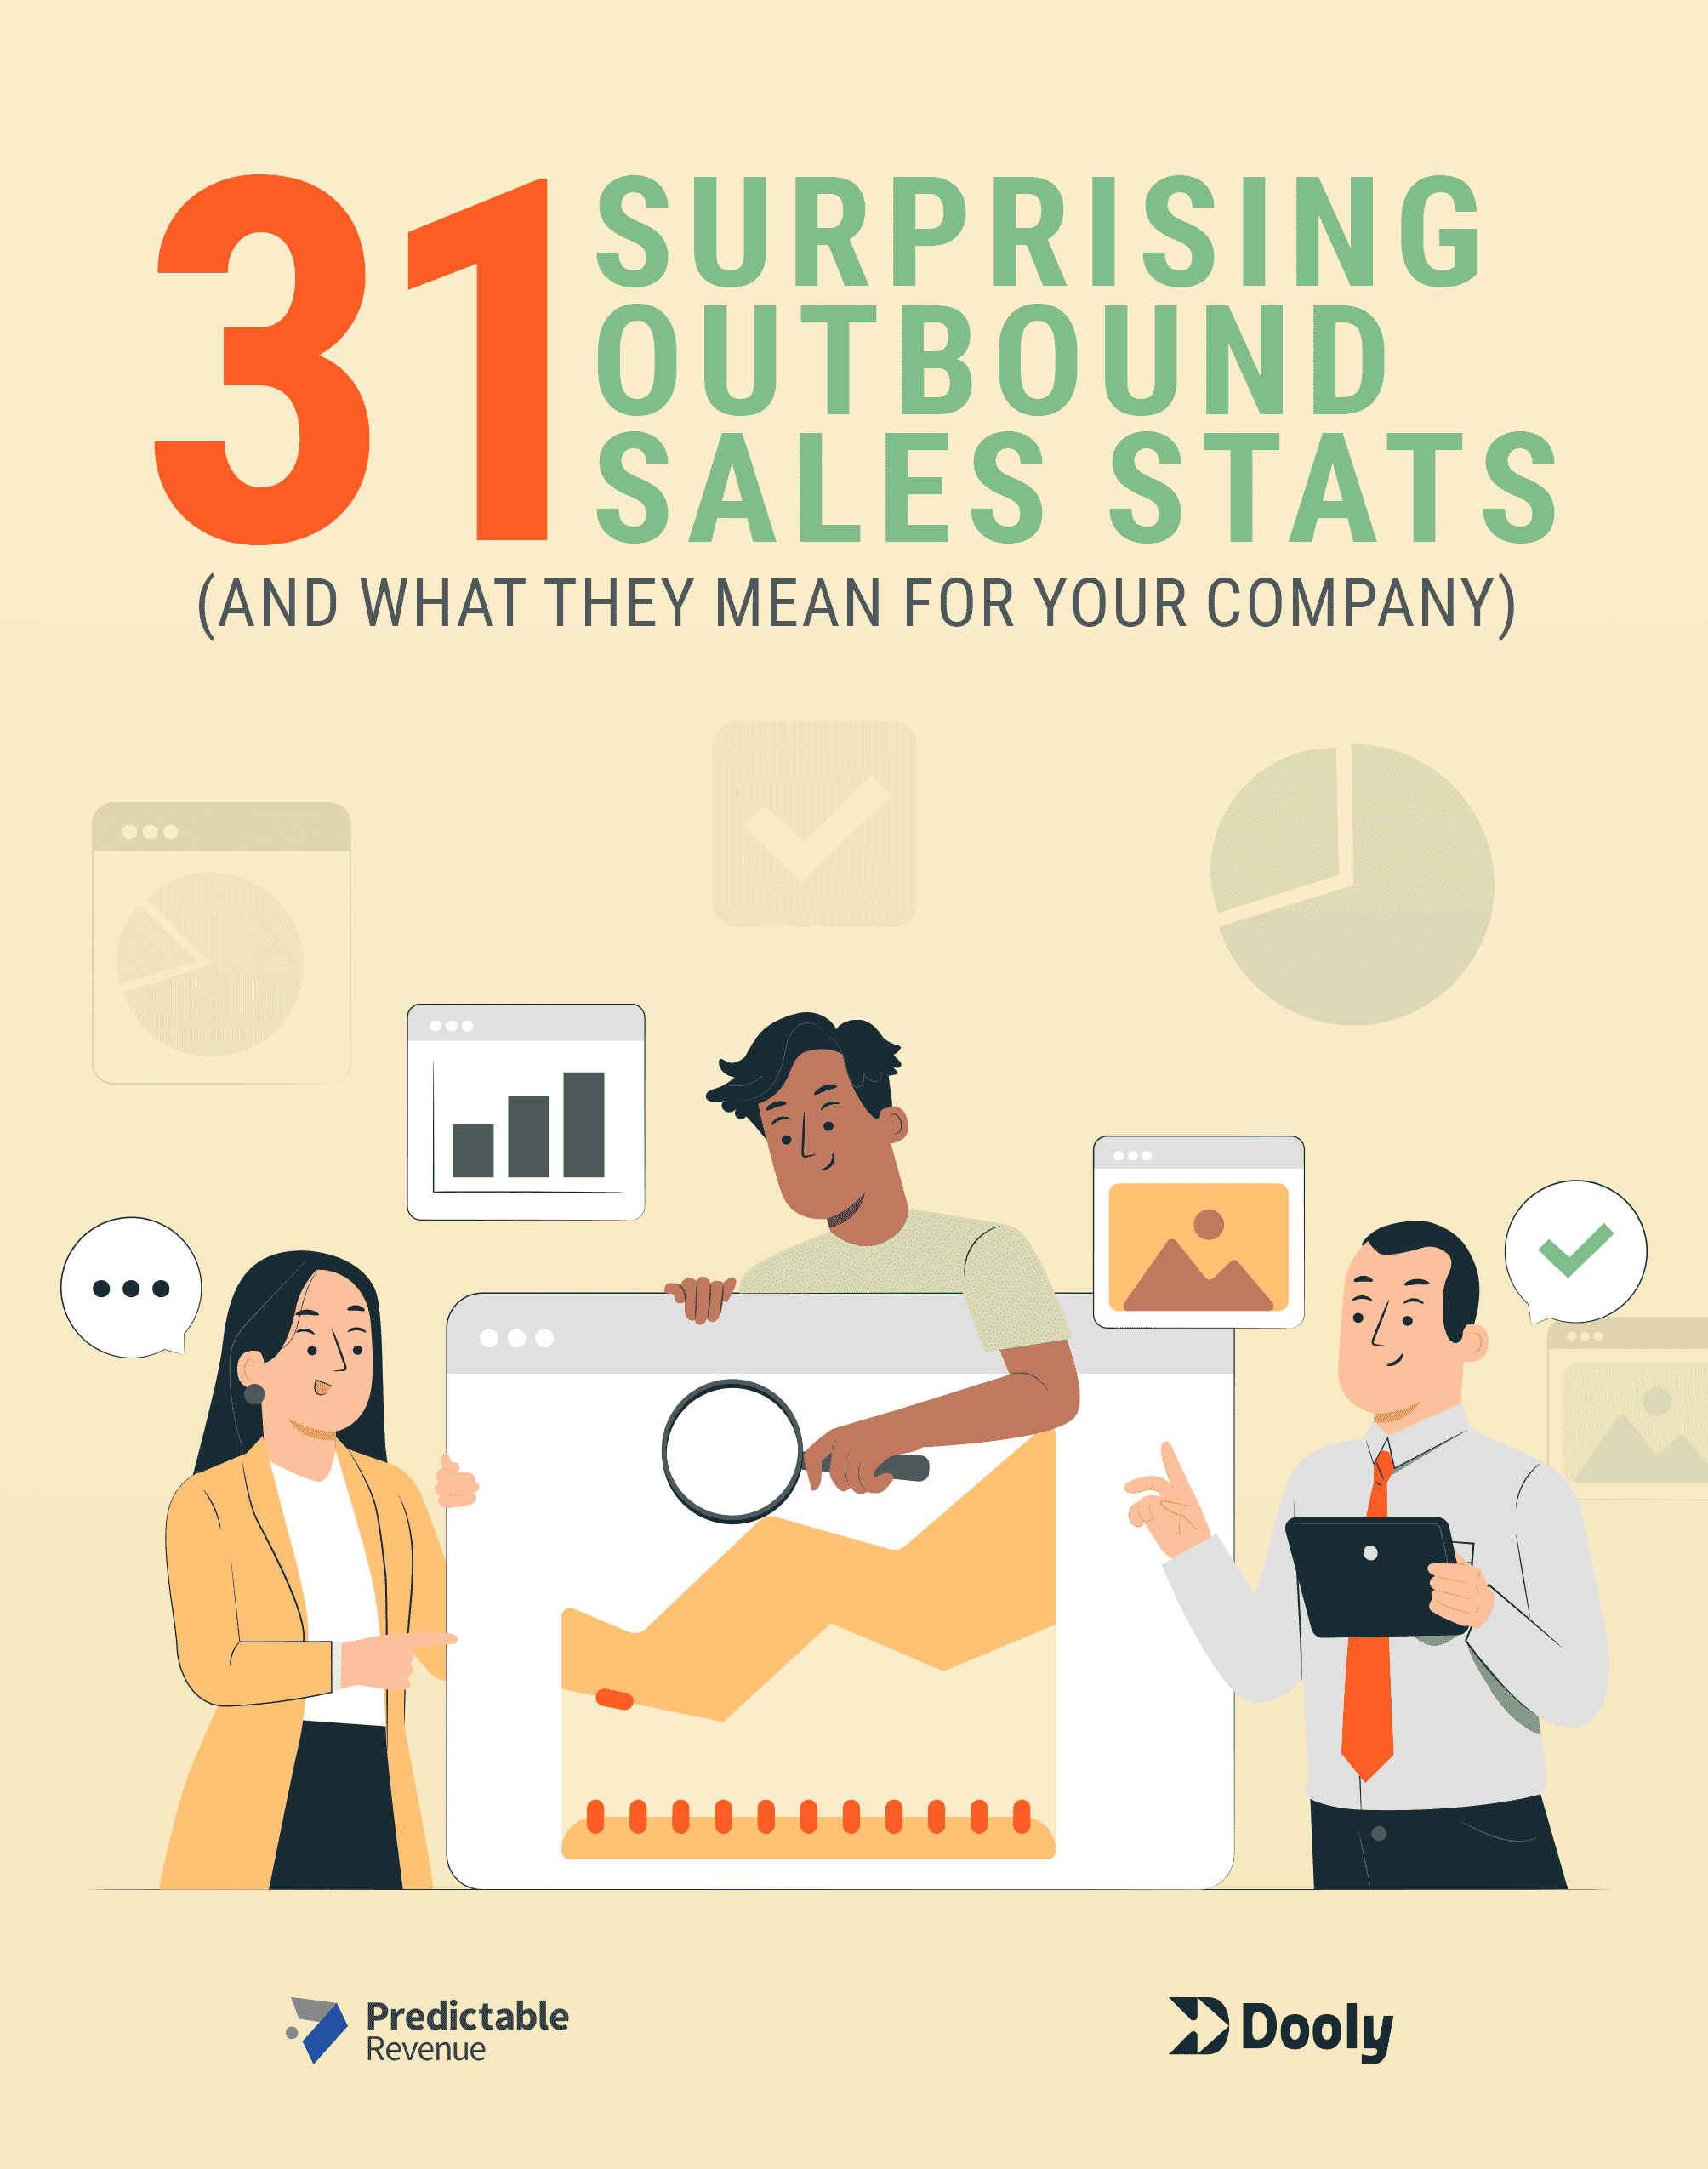 31 Surprising Outbound Sales Stats